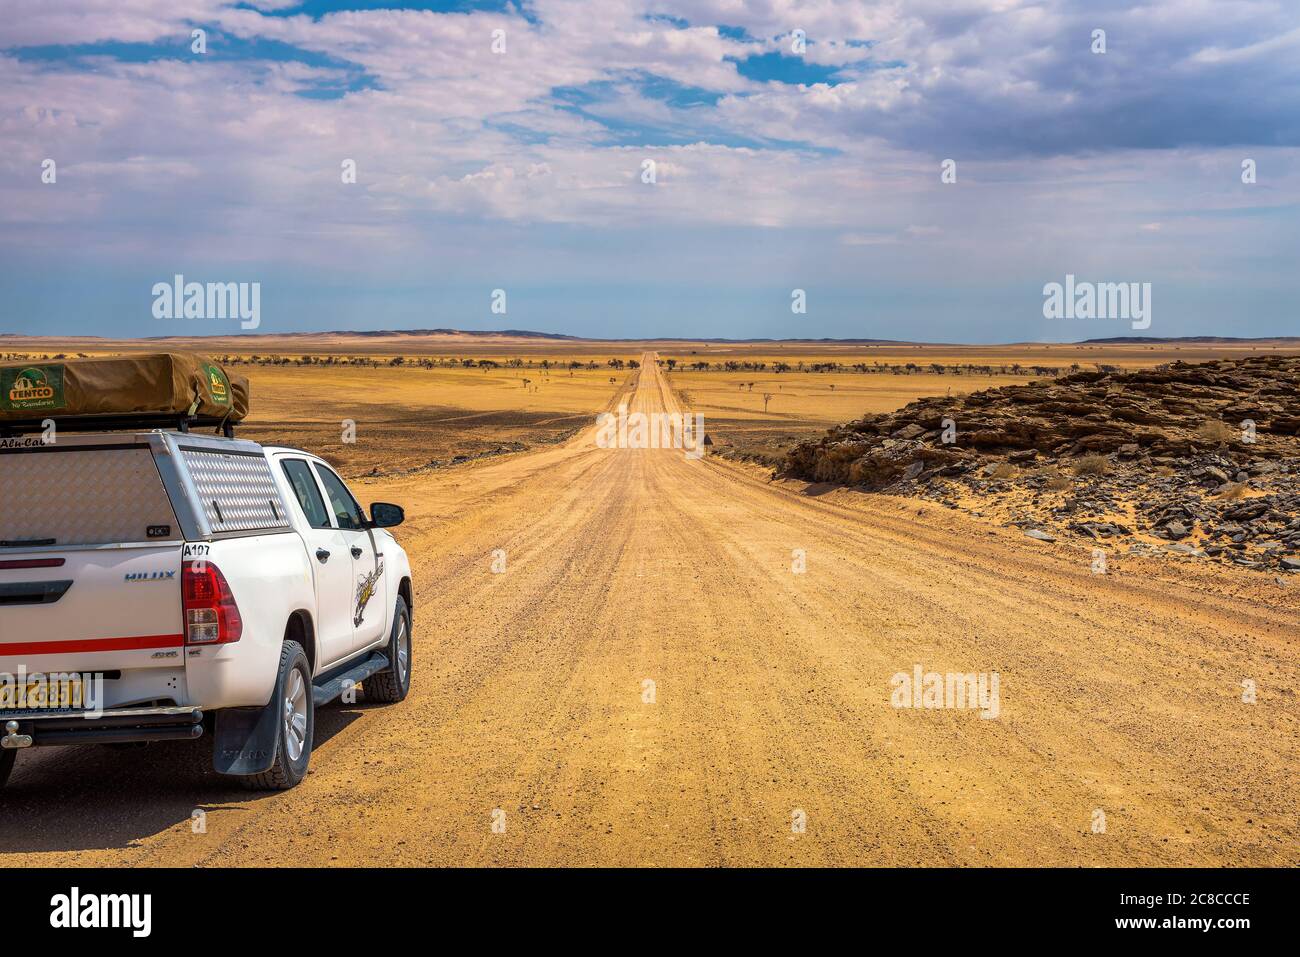 Namib Desert, Namibia - March 29, 2019 : Typical 4x4 rental car in Namibia equipped with camping gear and a roof tent driving on a dirt road in Namib Stock Photo